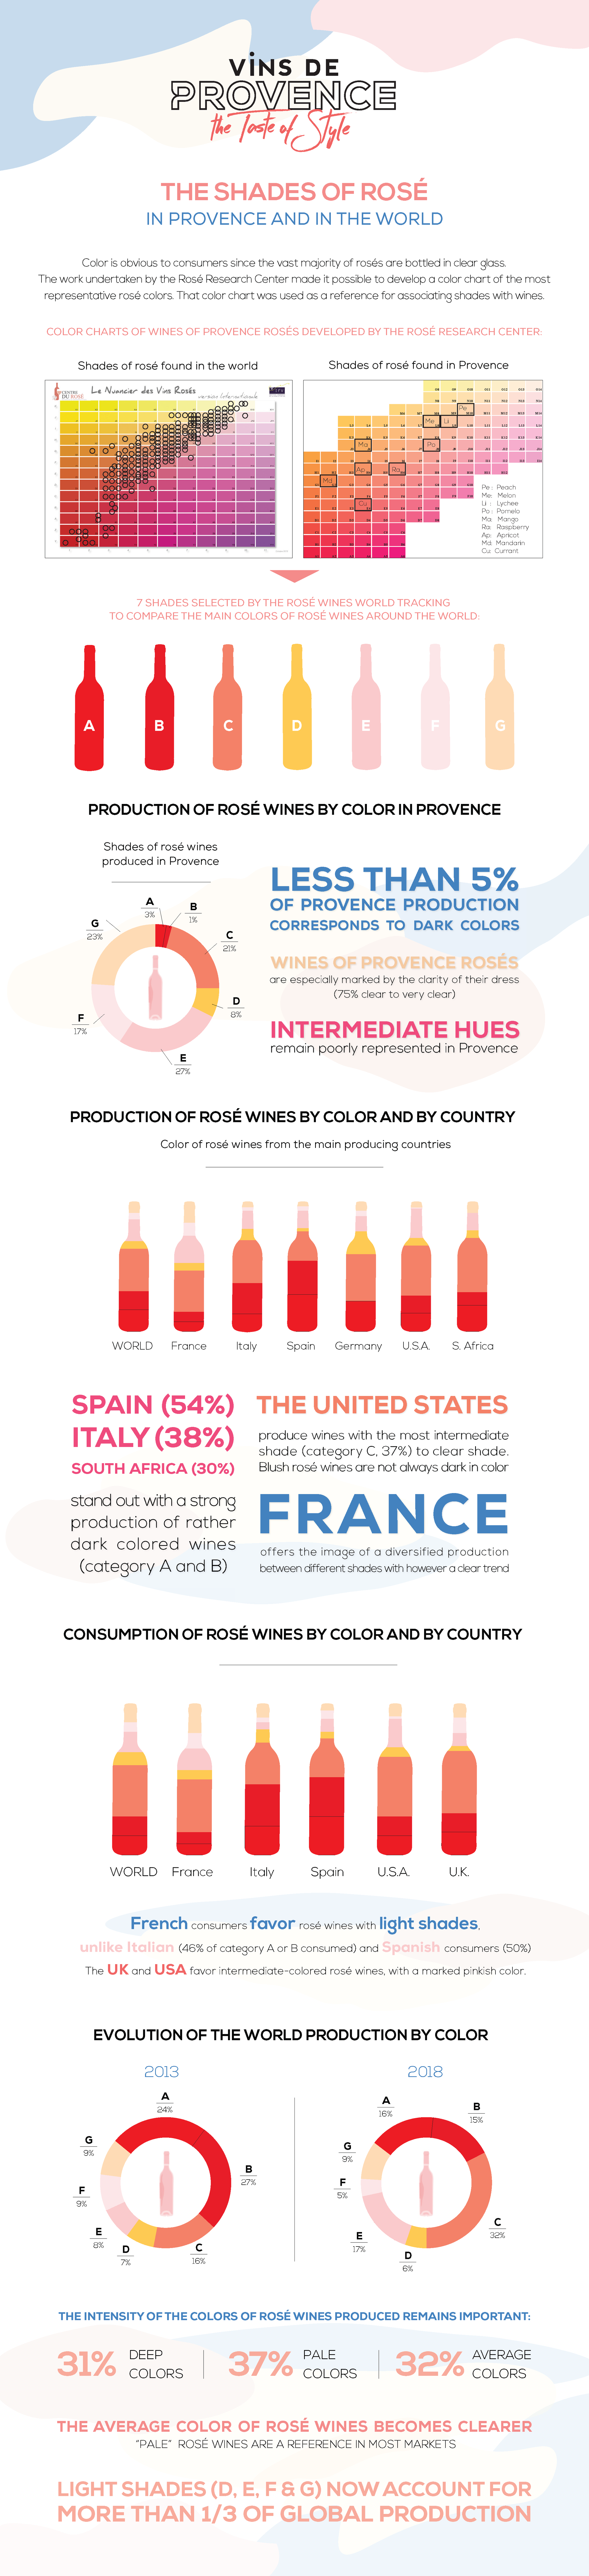 provence_infographics_final_06.26.2019.raw.png